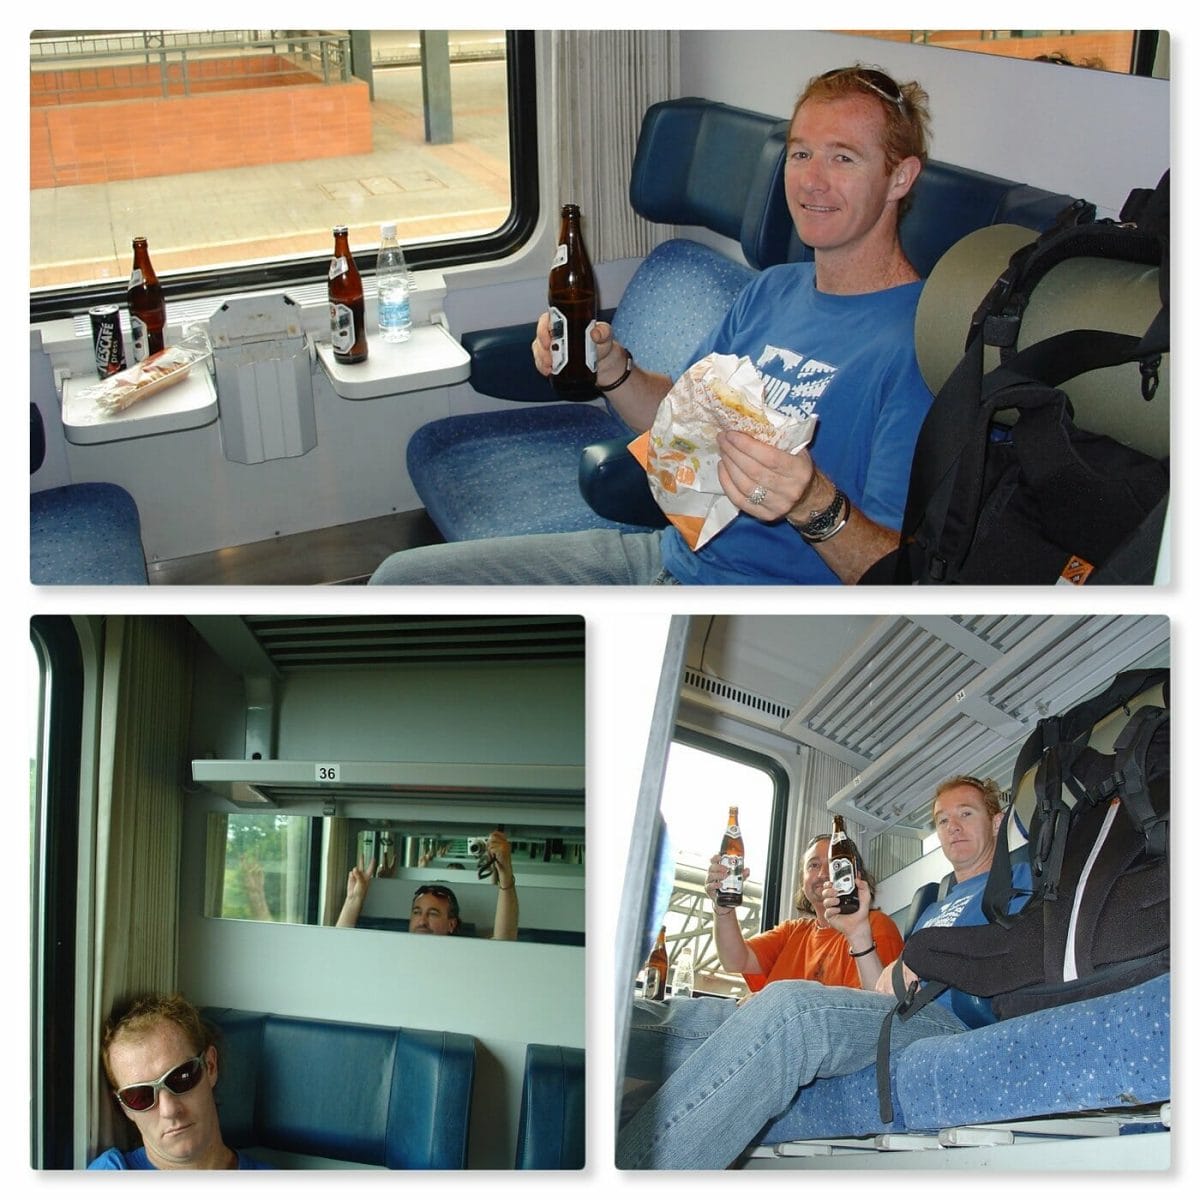 Michael Wilton and MRP (AKA THE CANDY TRAIL) celebrating MW's birthday on the train from Prague to Berlin in 2005.